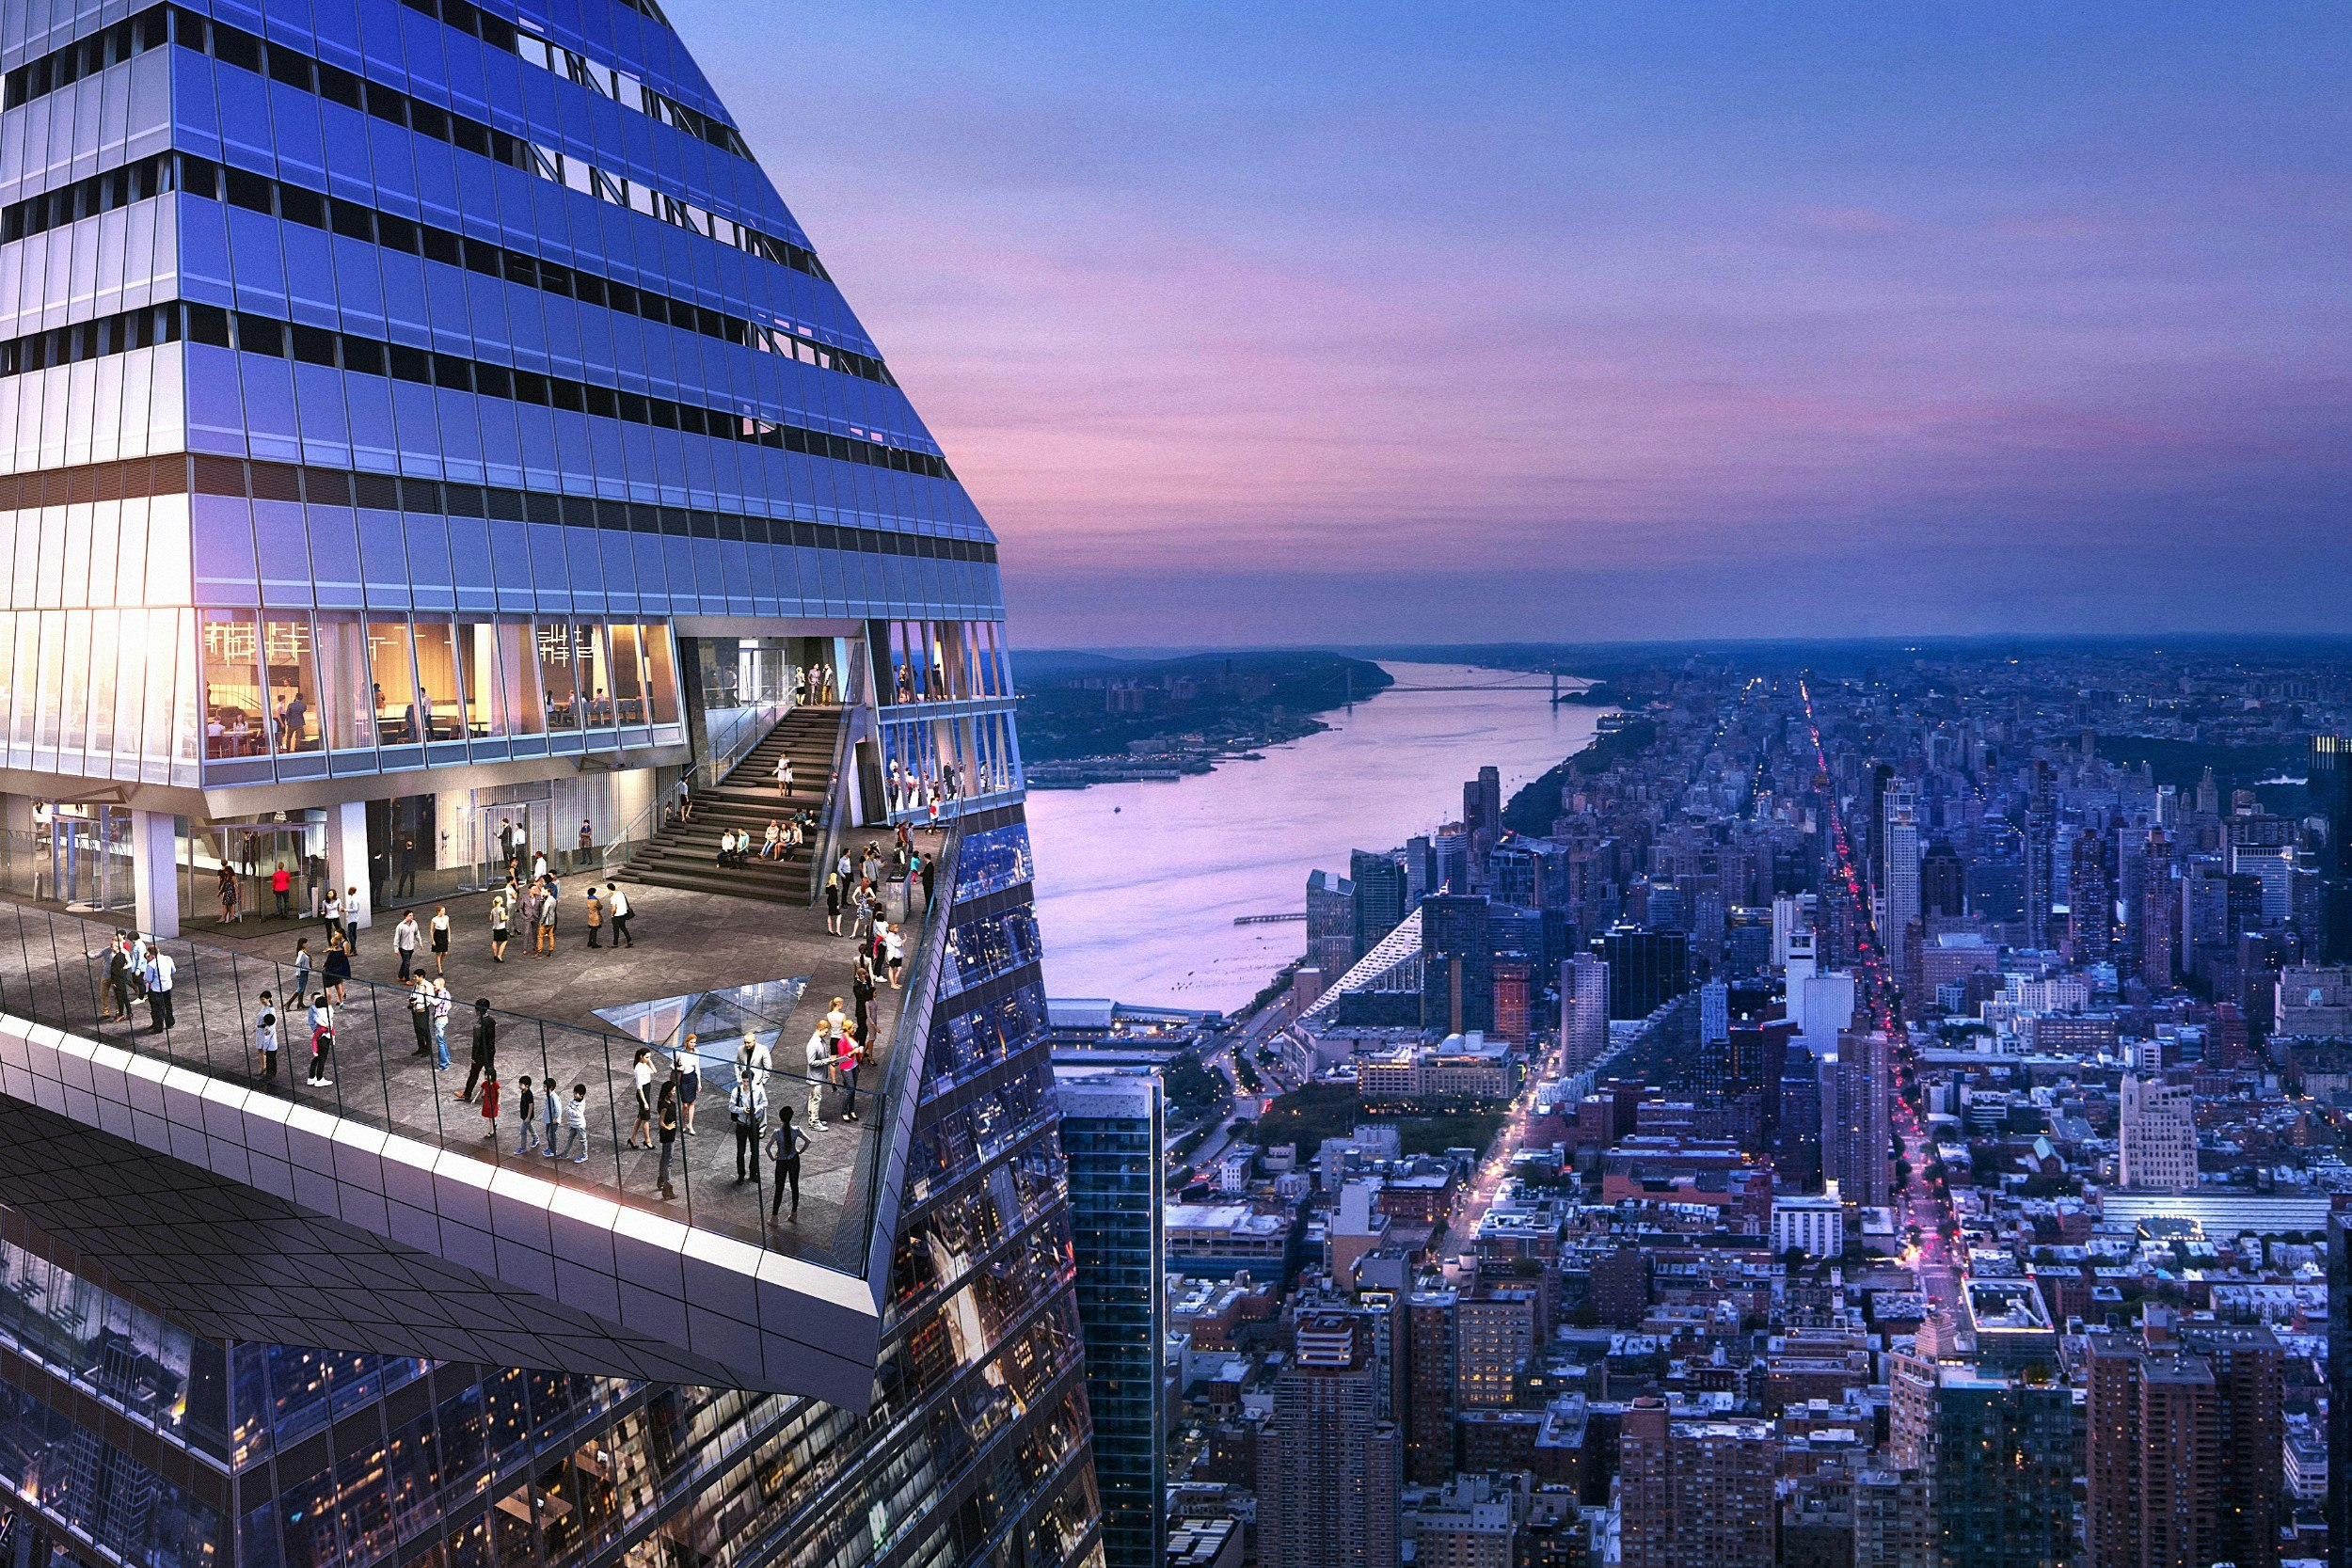 A rendering of the Edge observation desk in New York City